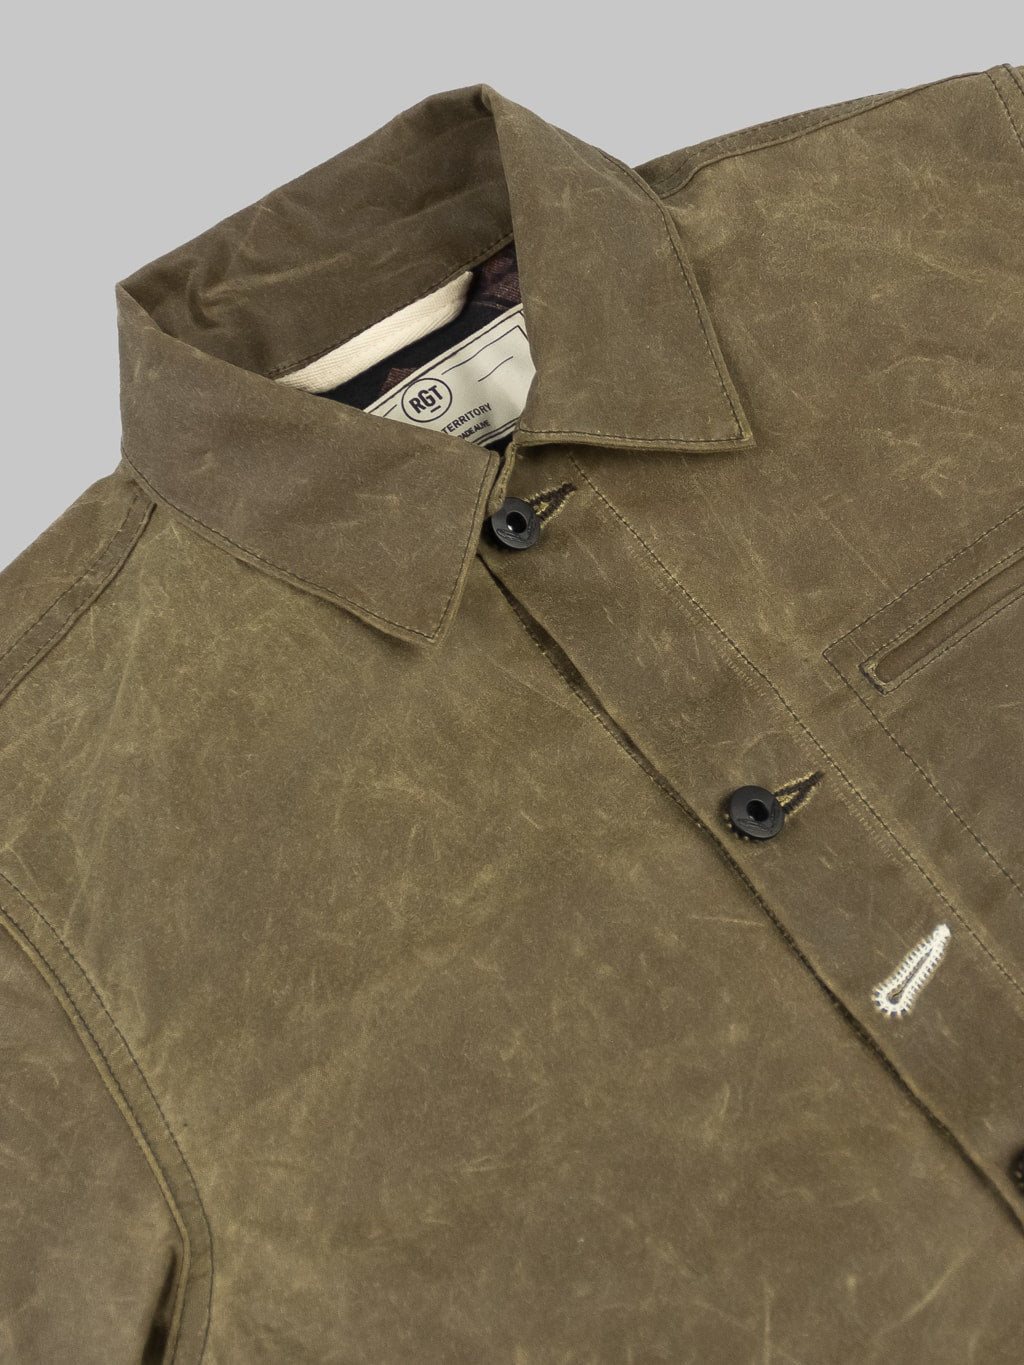 Rogue Territory Supply Jacket Lined Brown Ridgeline